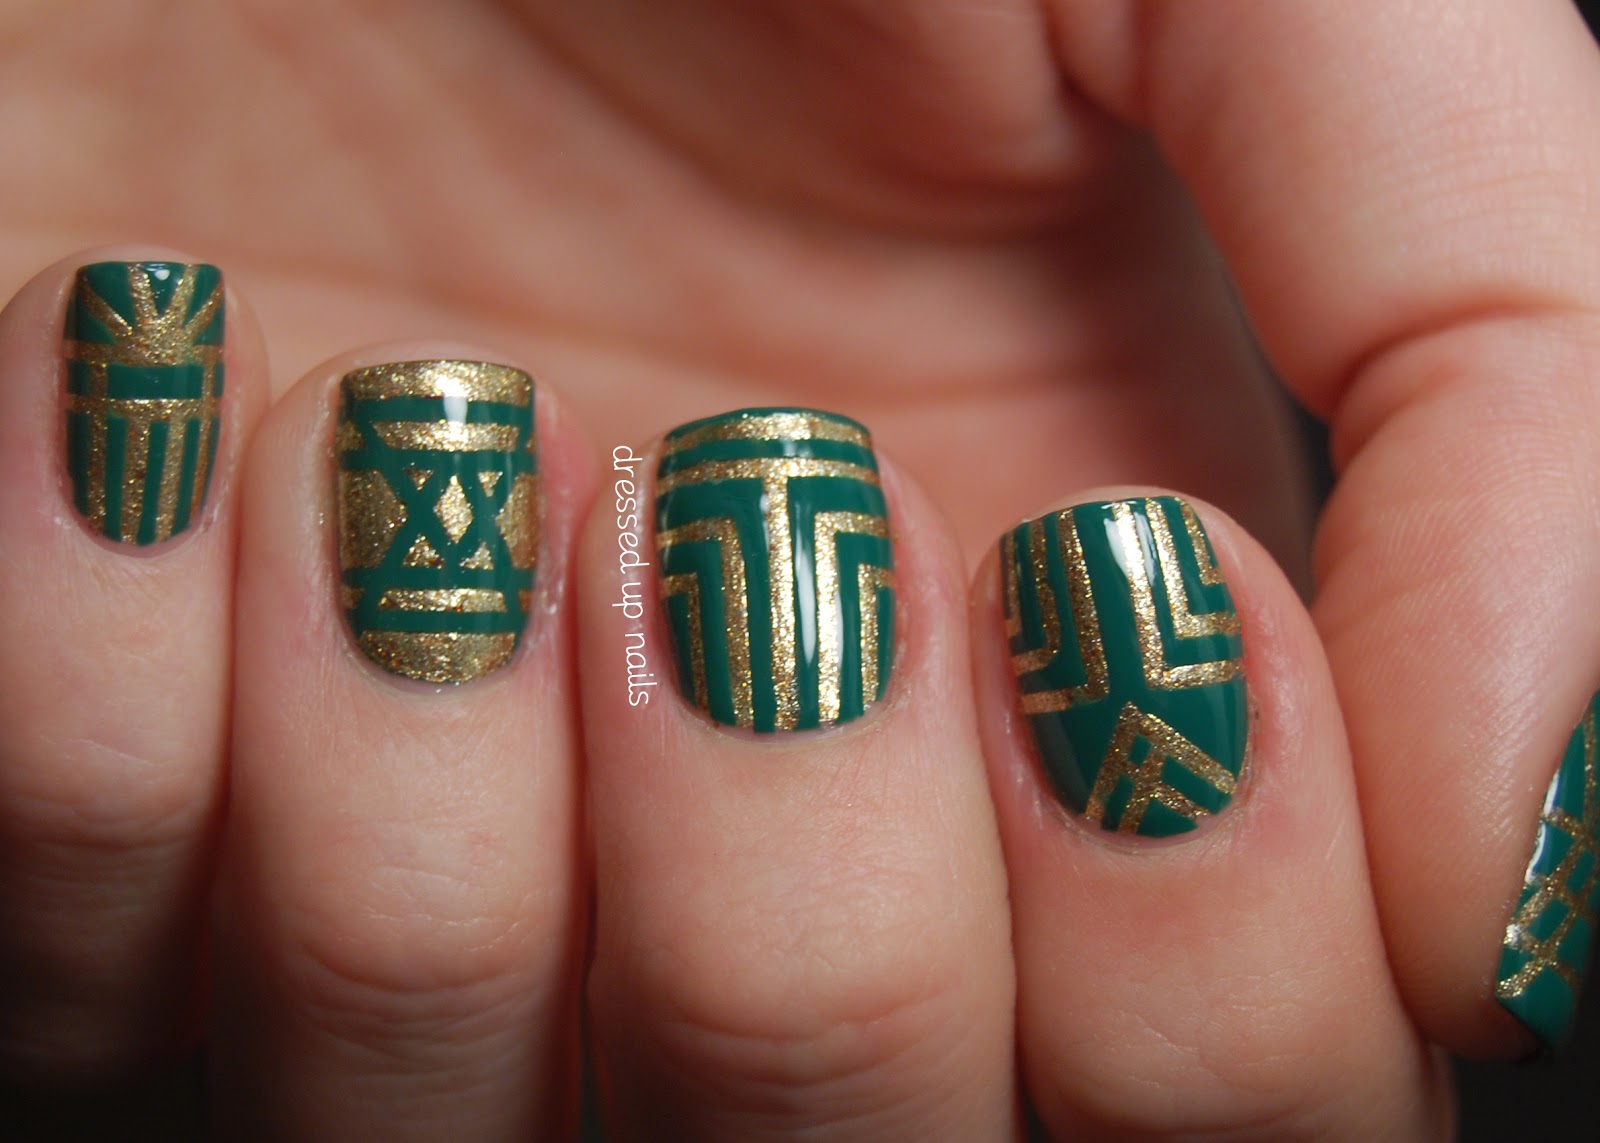 4. "Cute Nail Designs with Scotch Tape" - wide 3